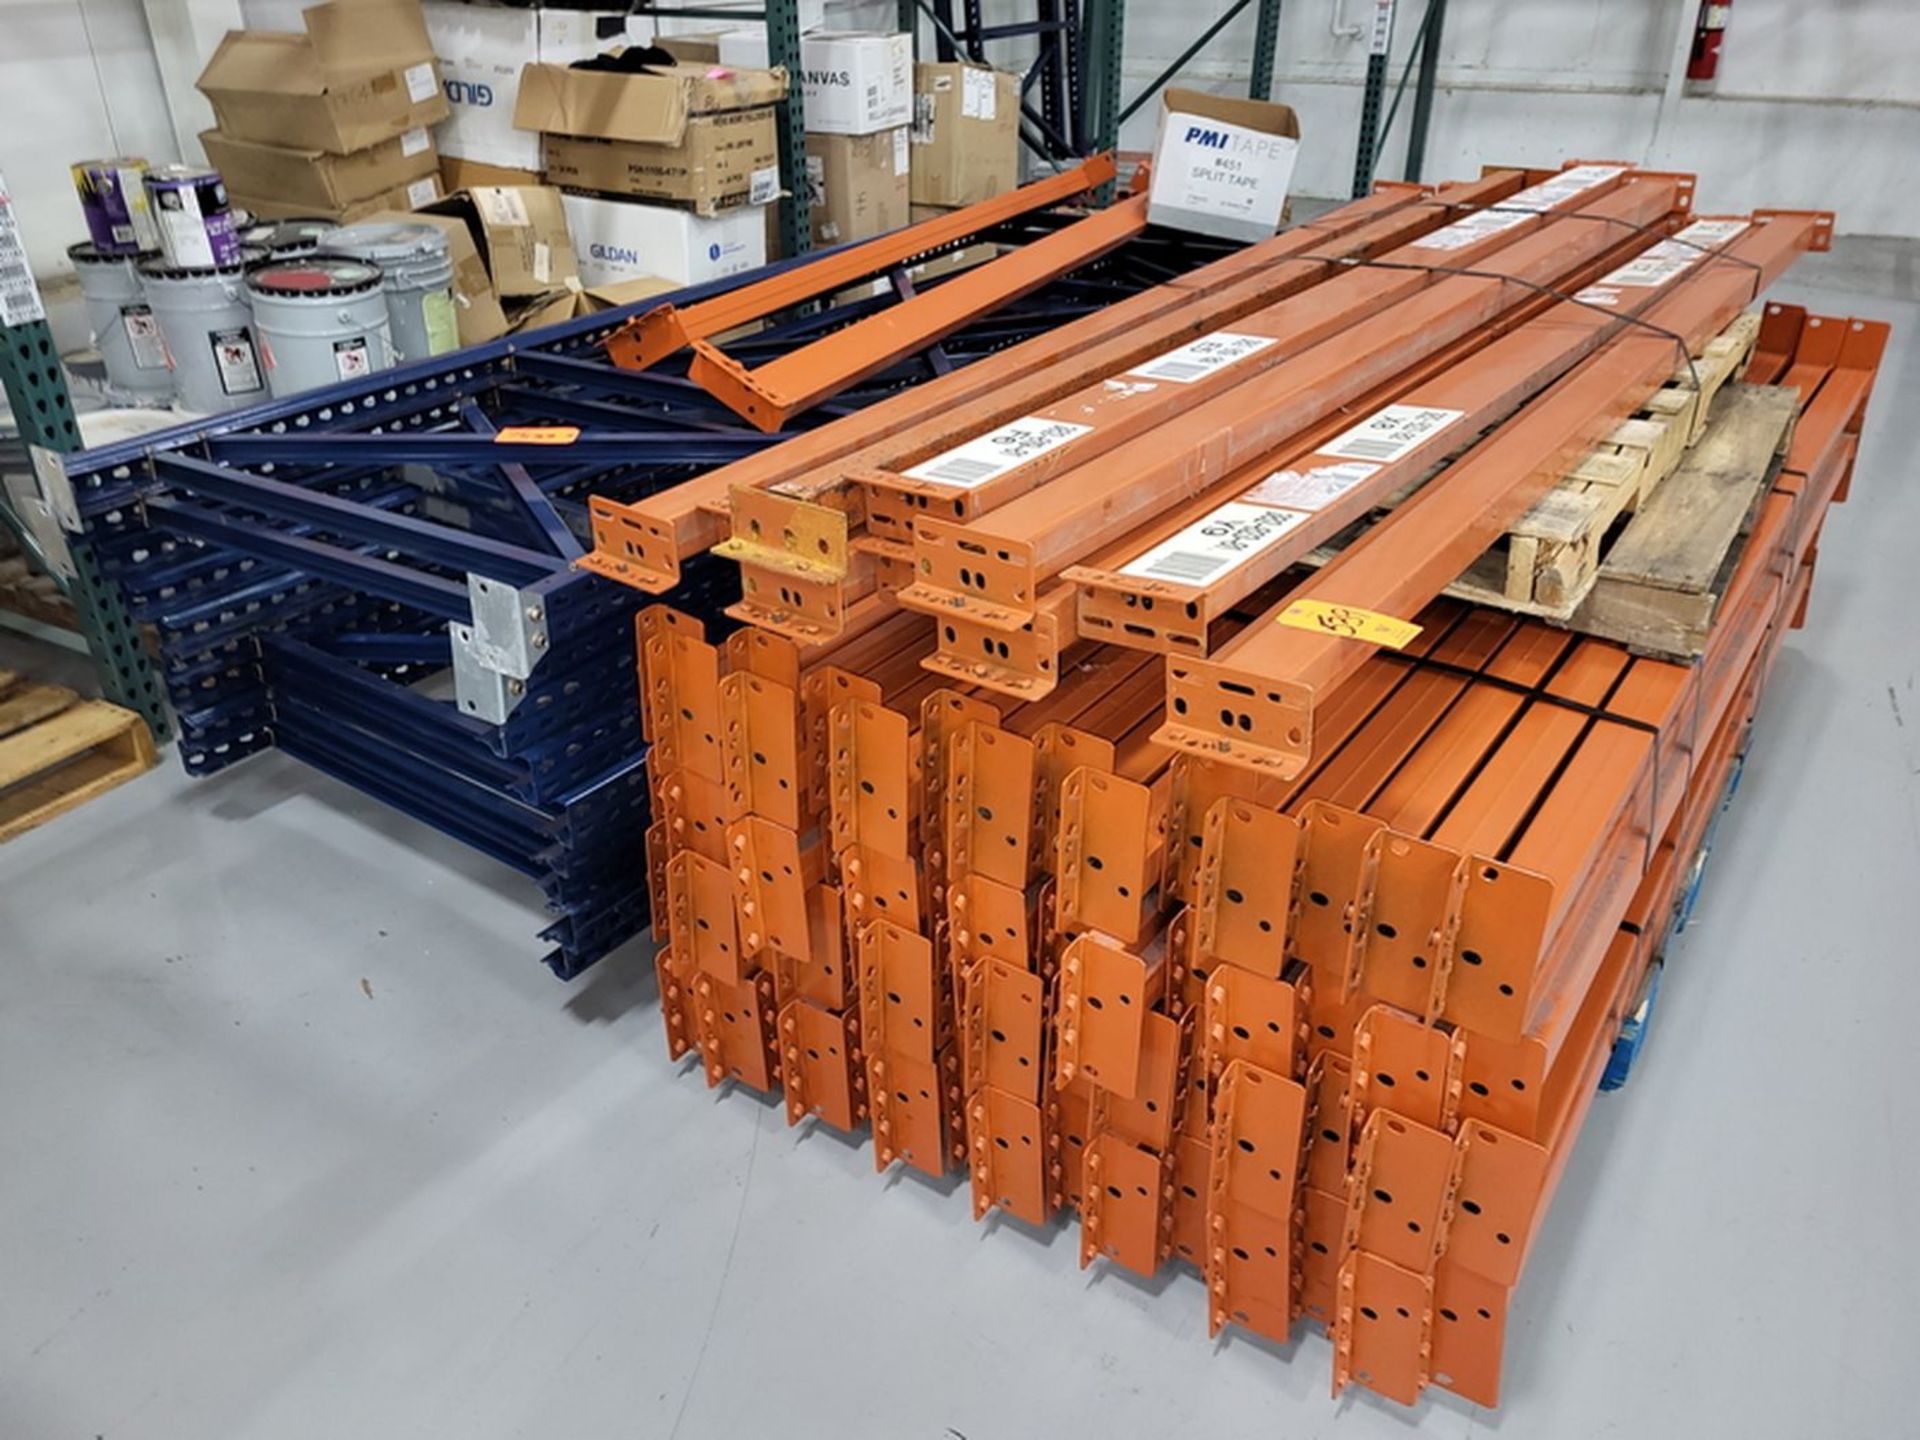 Lot - Interlake Medium Duty Pallet Racking; Disassembled, Includes (12) approx. 12 ft. Uprights, (